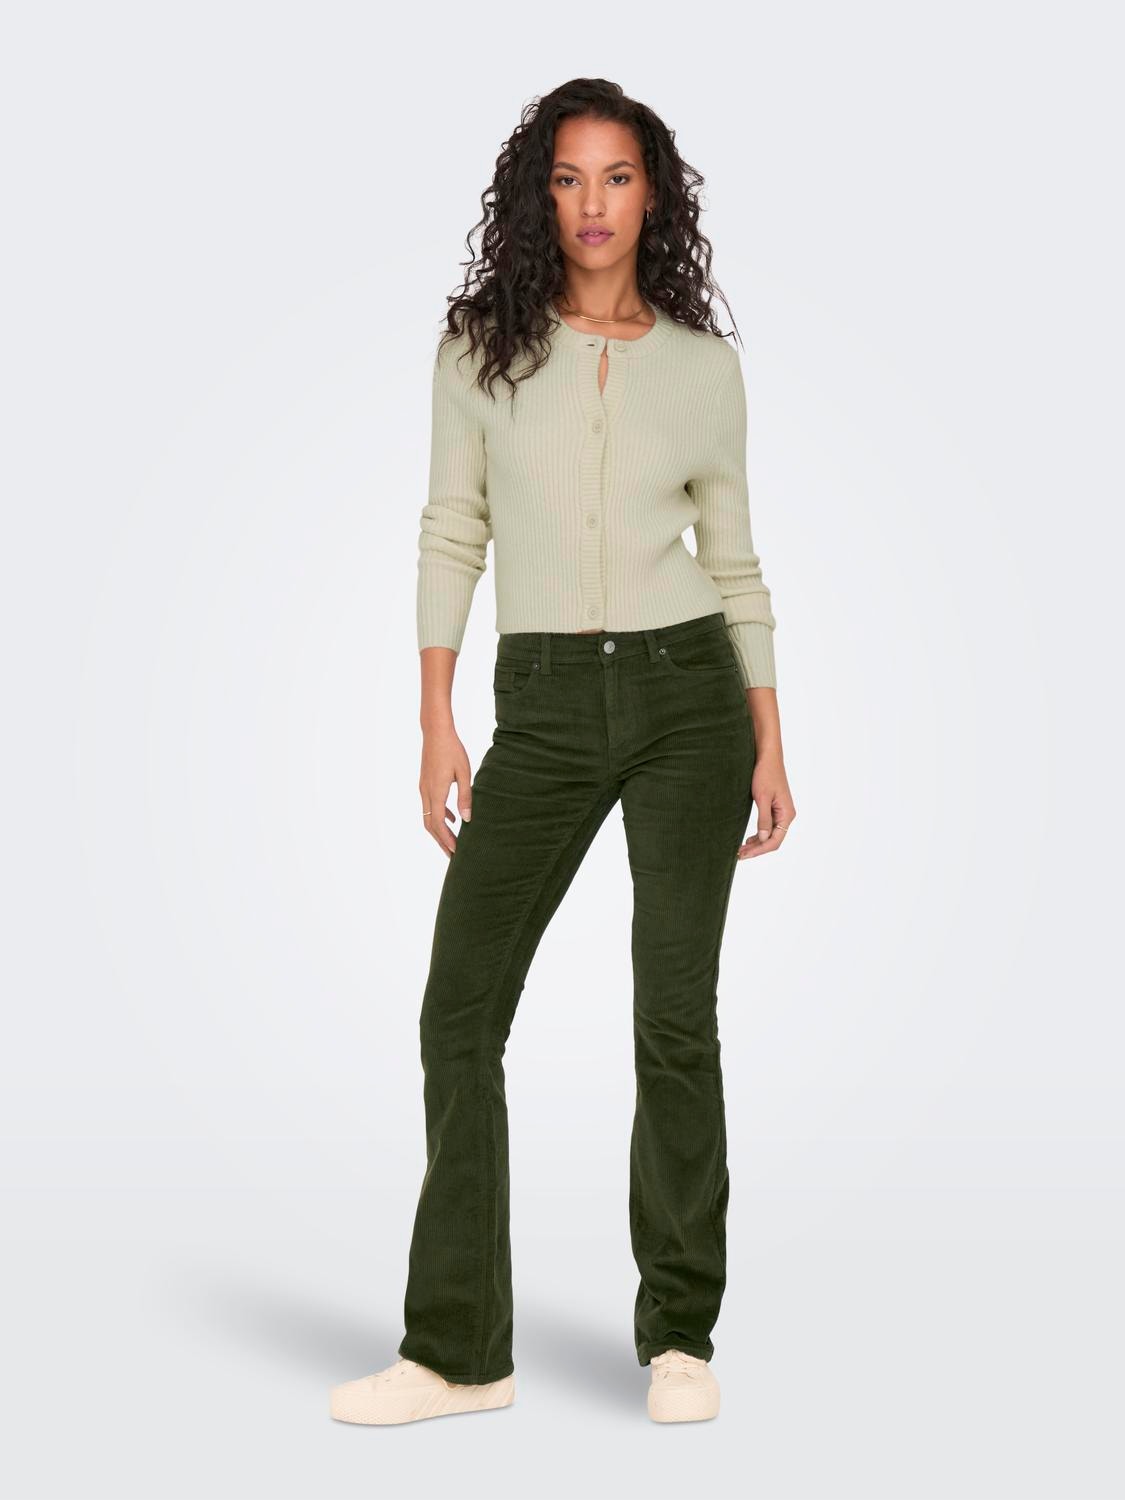 ONLY Sweet flared corduroy bukser -Olive Night - 15304256